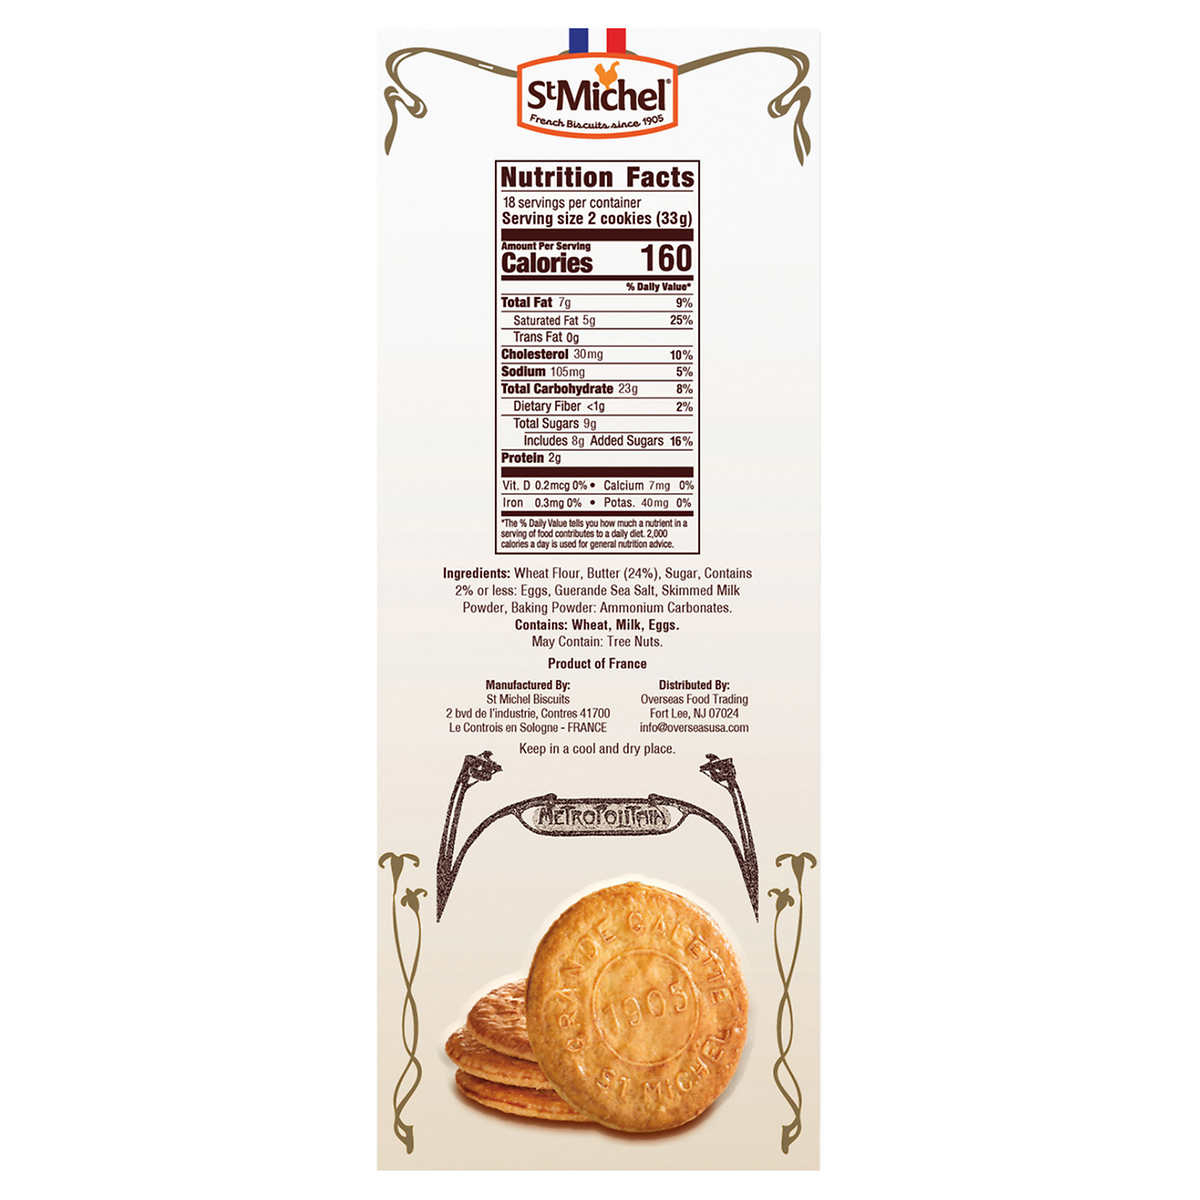 St. Michel La Grande Galette French Butter Cookies, 21.16 Ounce